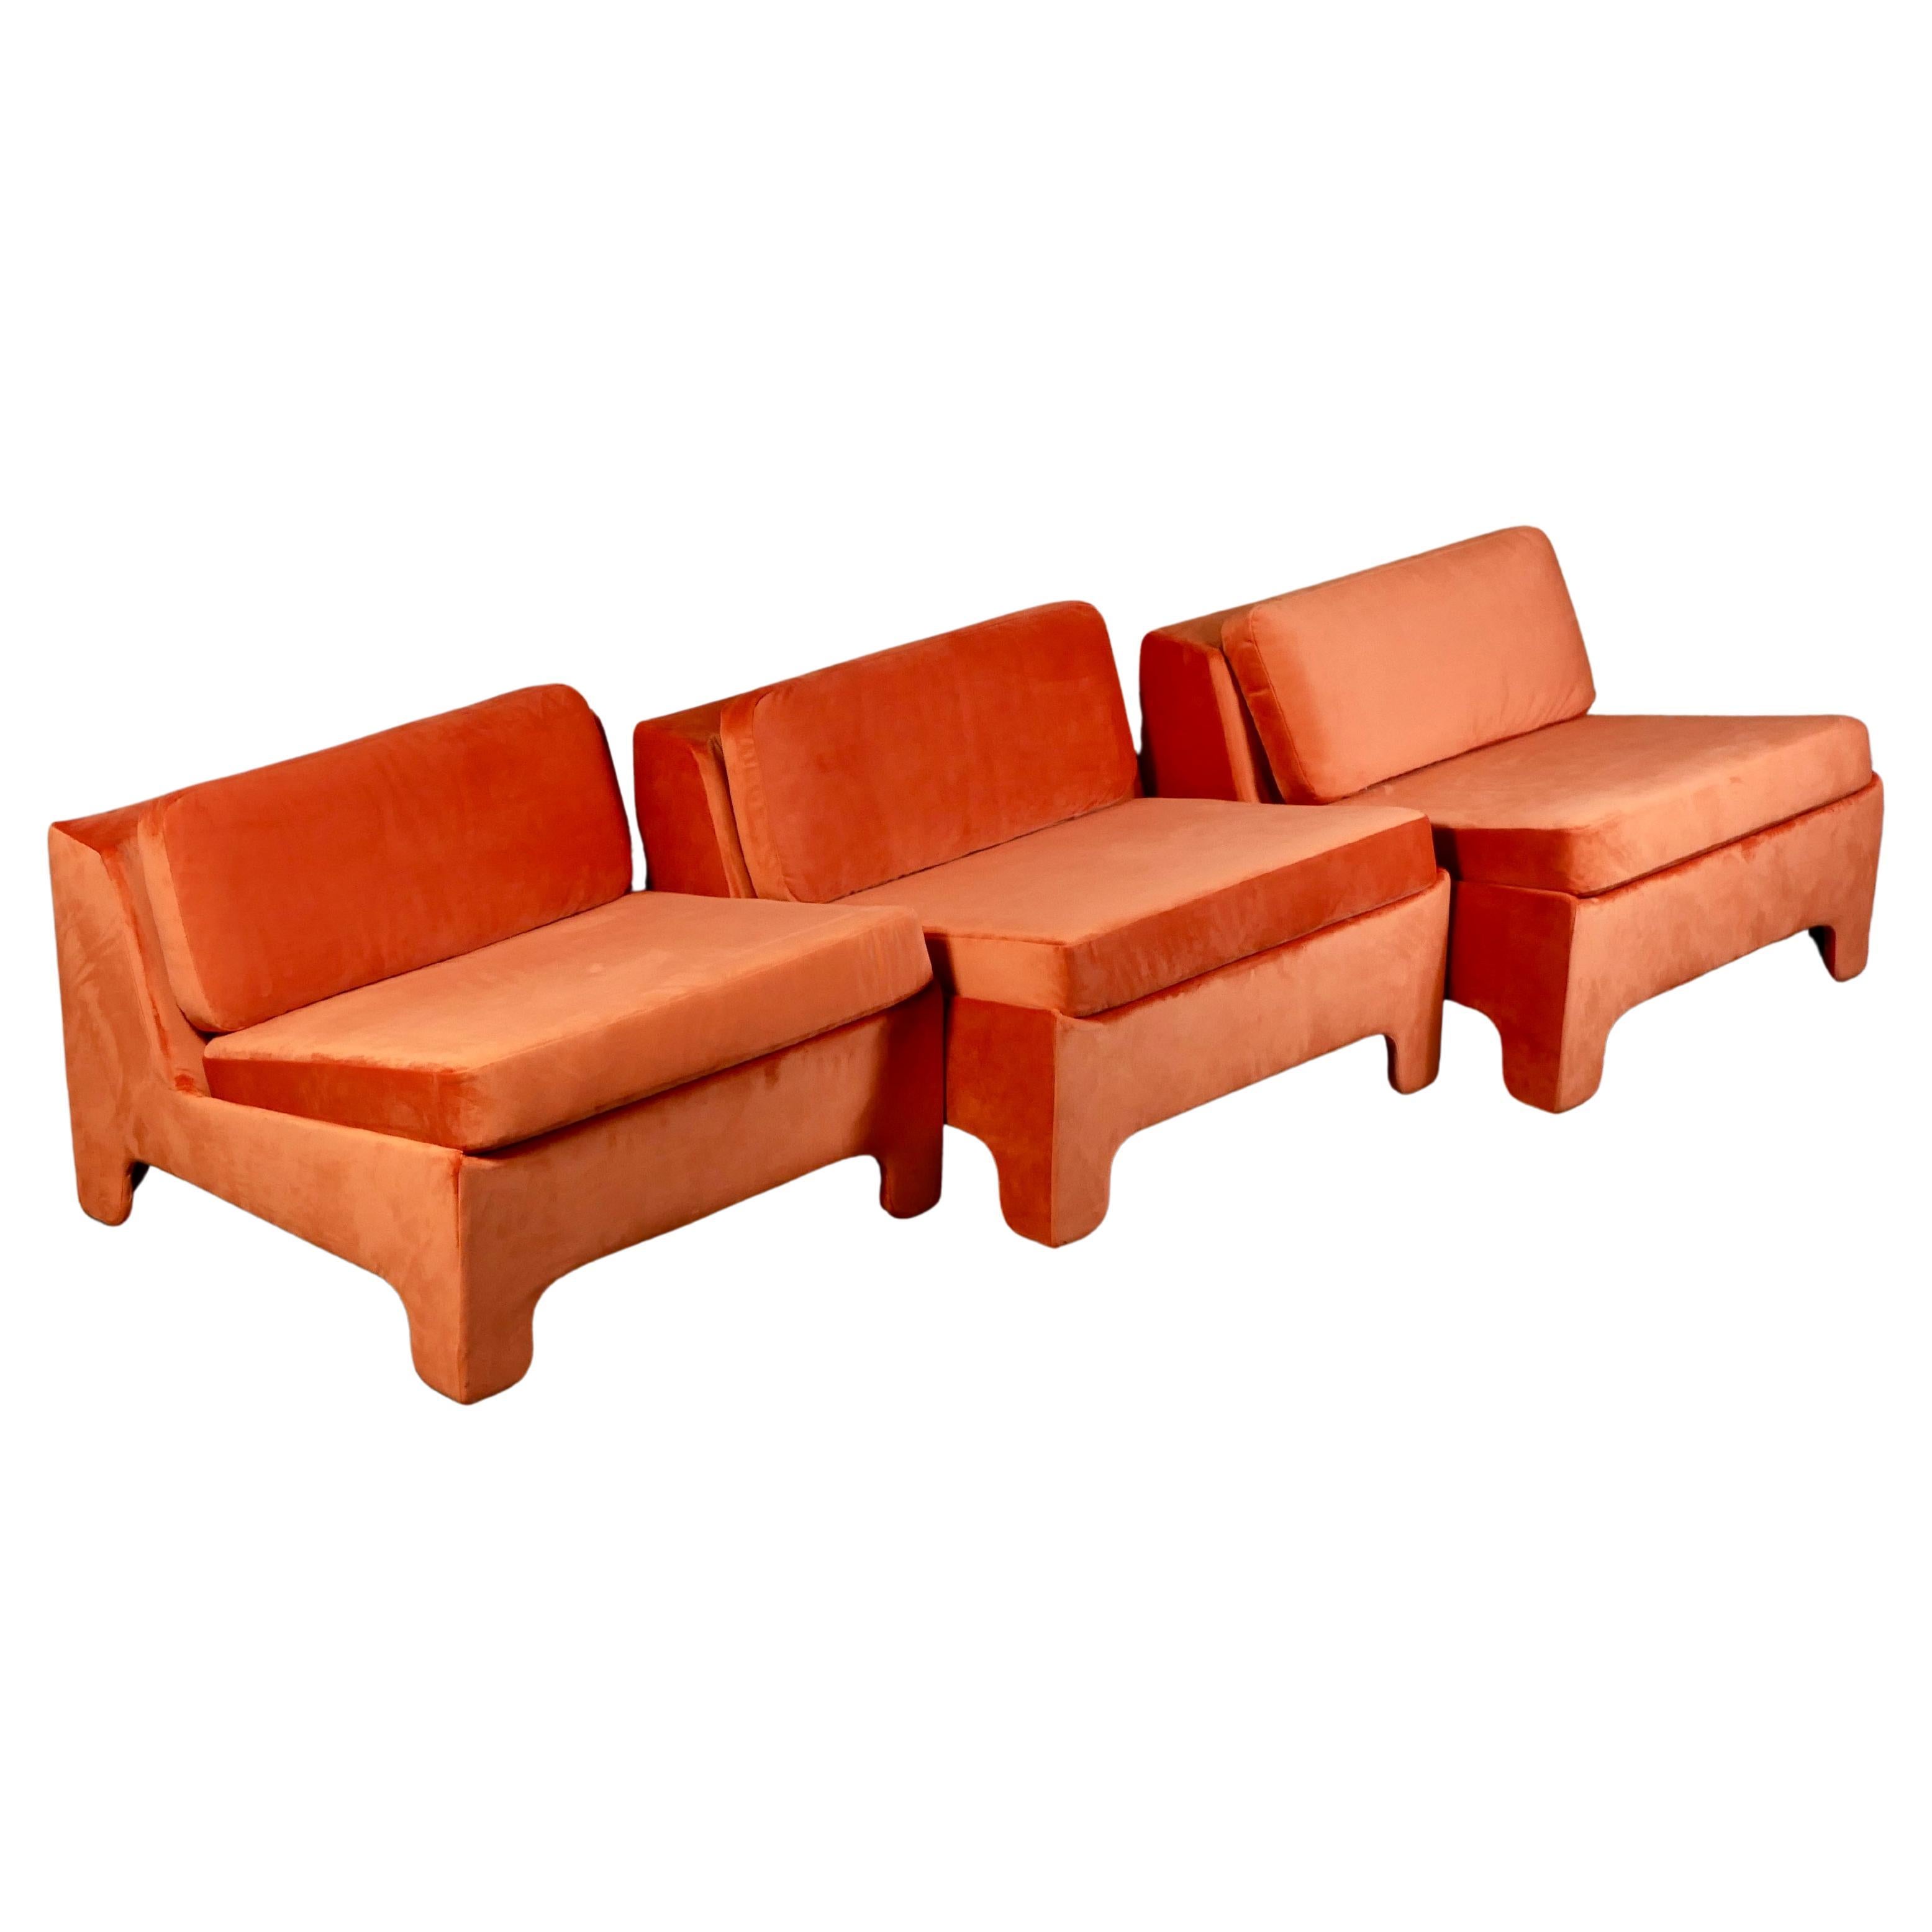 Beautiful and rare set of 3 armchairs made by Beaufort in Brussels, Belgium, in the 1970s.
Entirely reupholstered in an orange soft velvet.
Dimensions : H53, W76, D75
